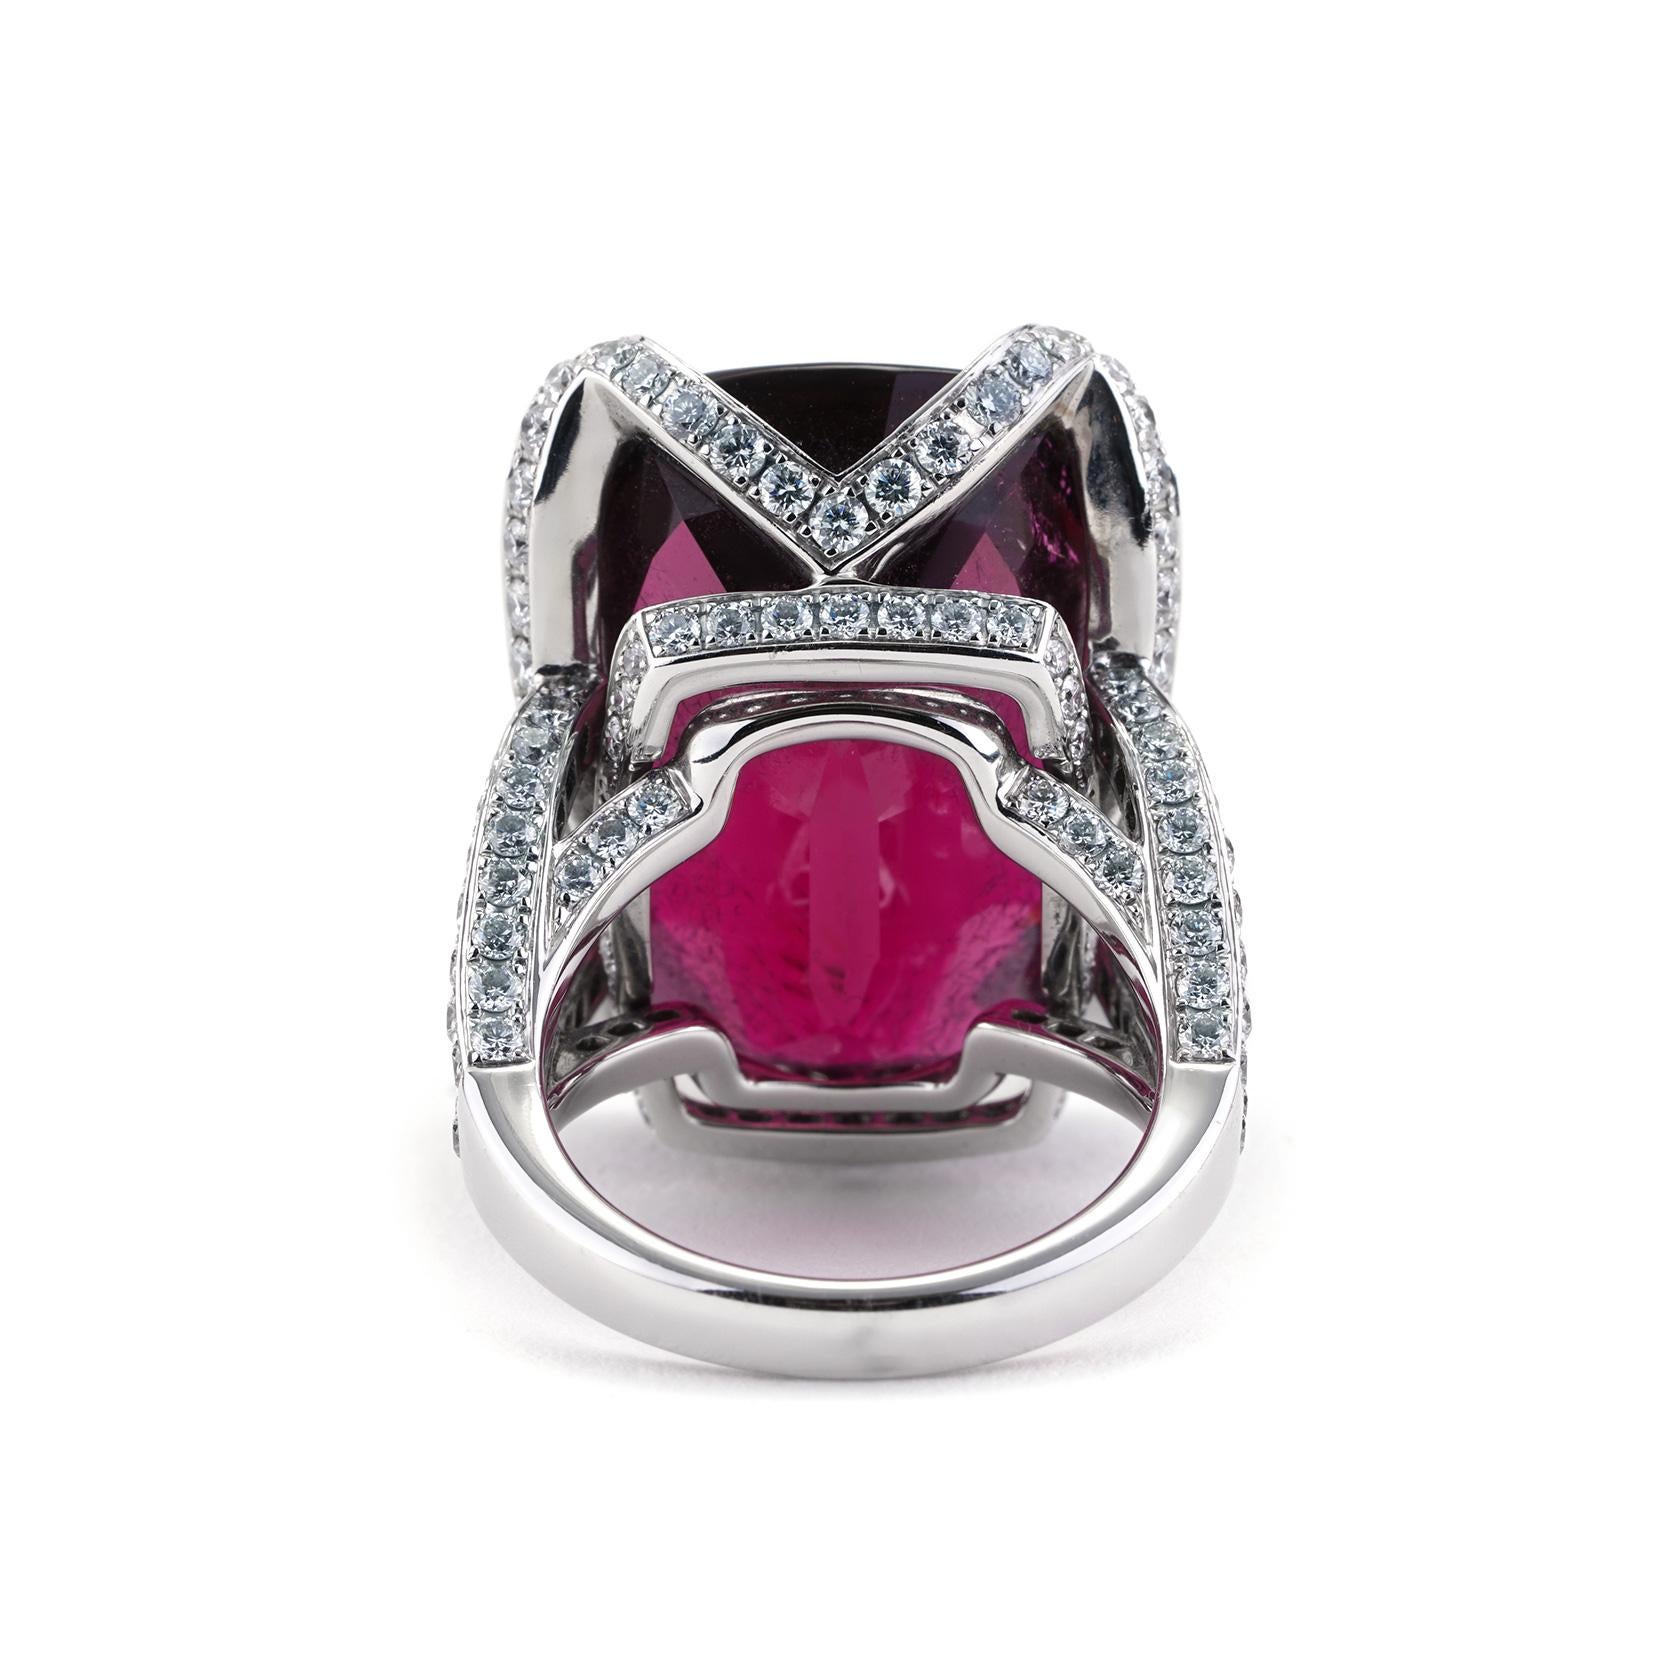 Very Rare 38.21 Carat Rubellite and Diamond Cocktail Ring in 18K White Gold In New Condition For Sale In Chicago, IL